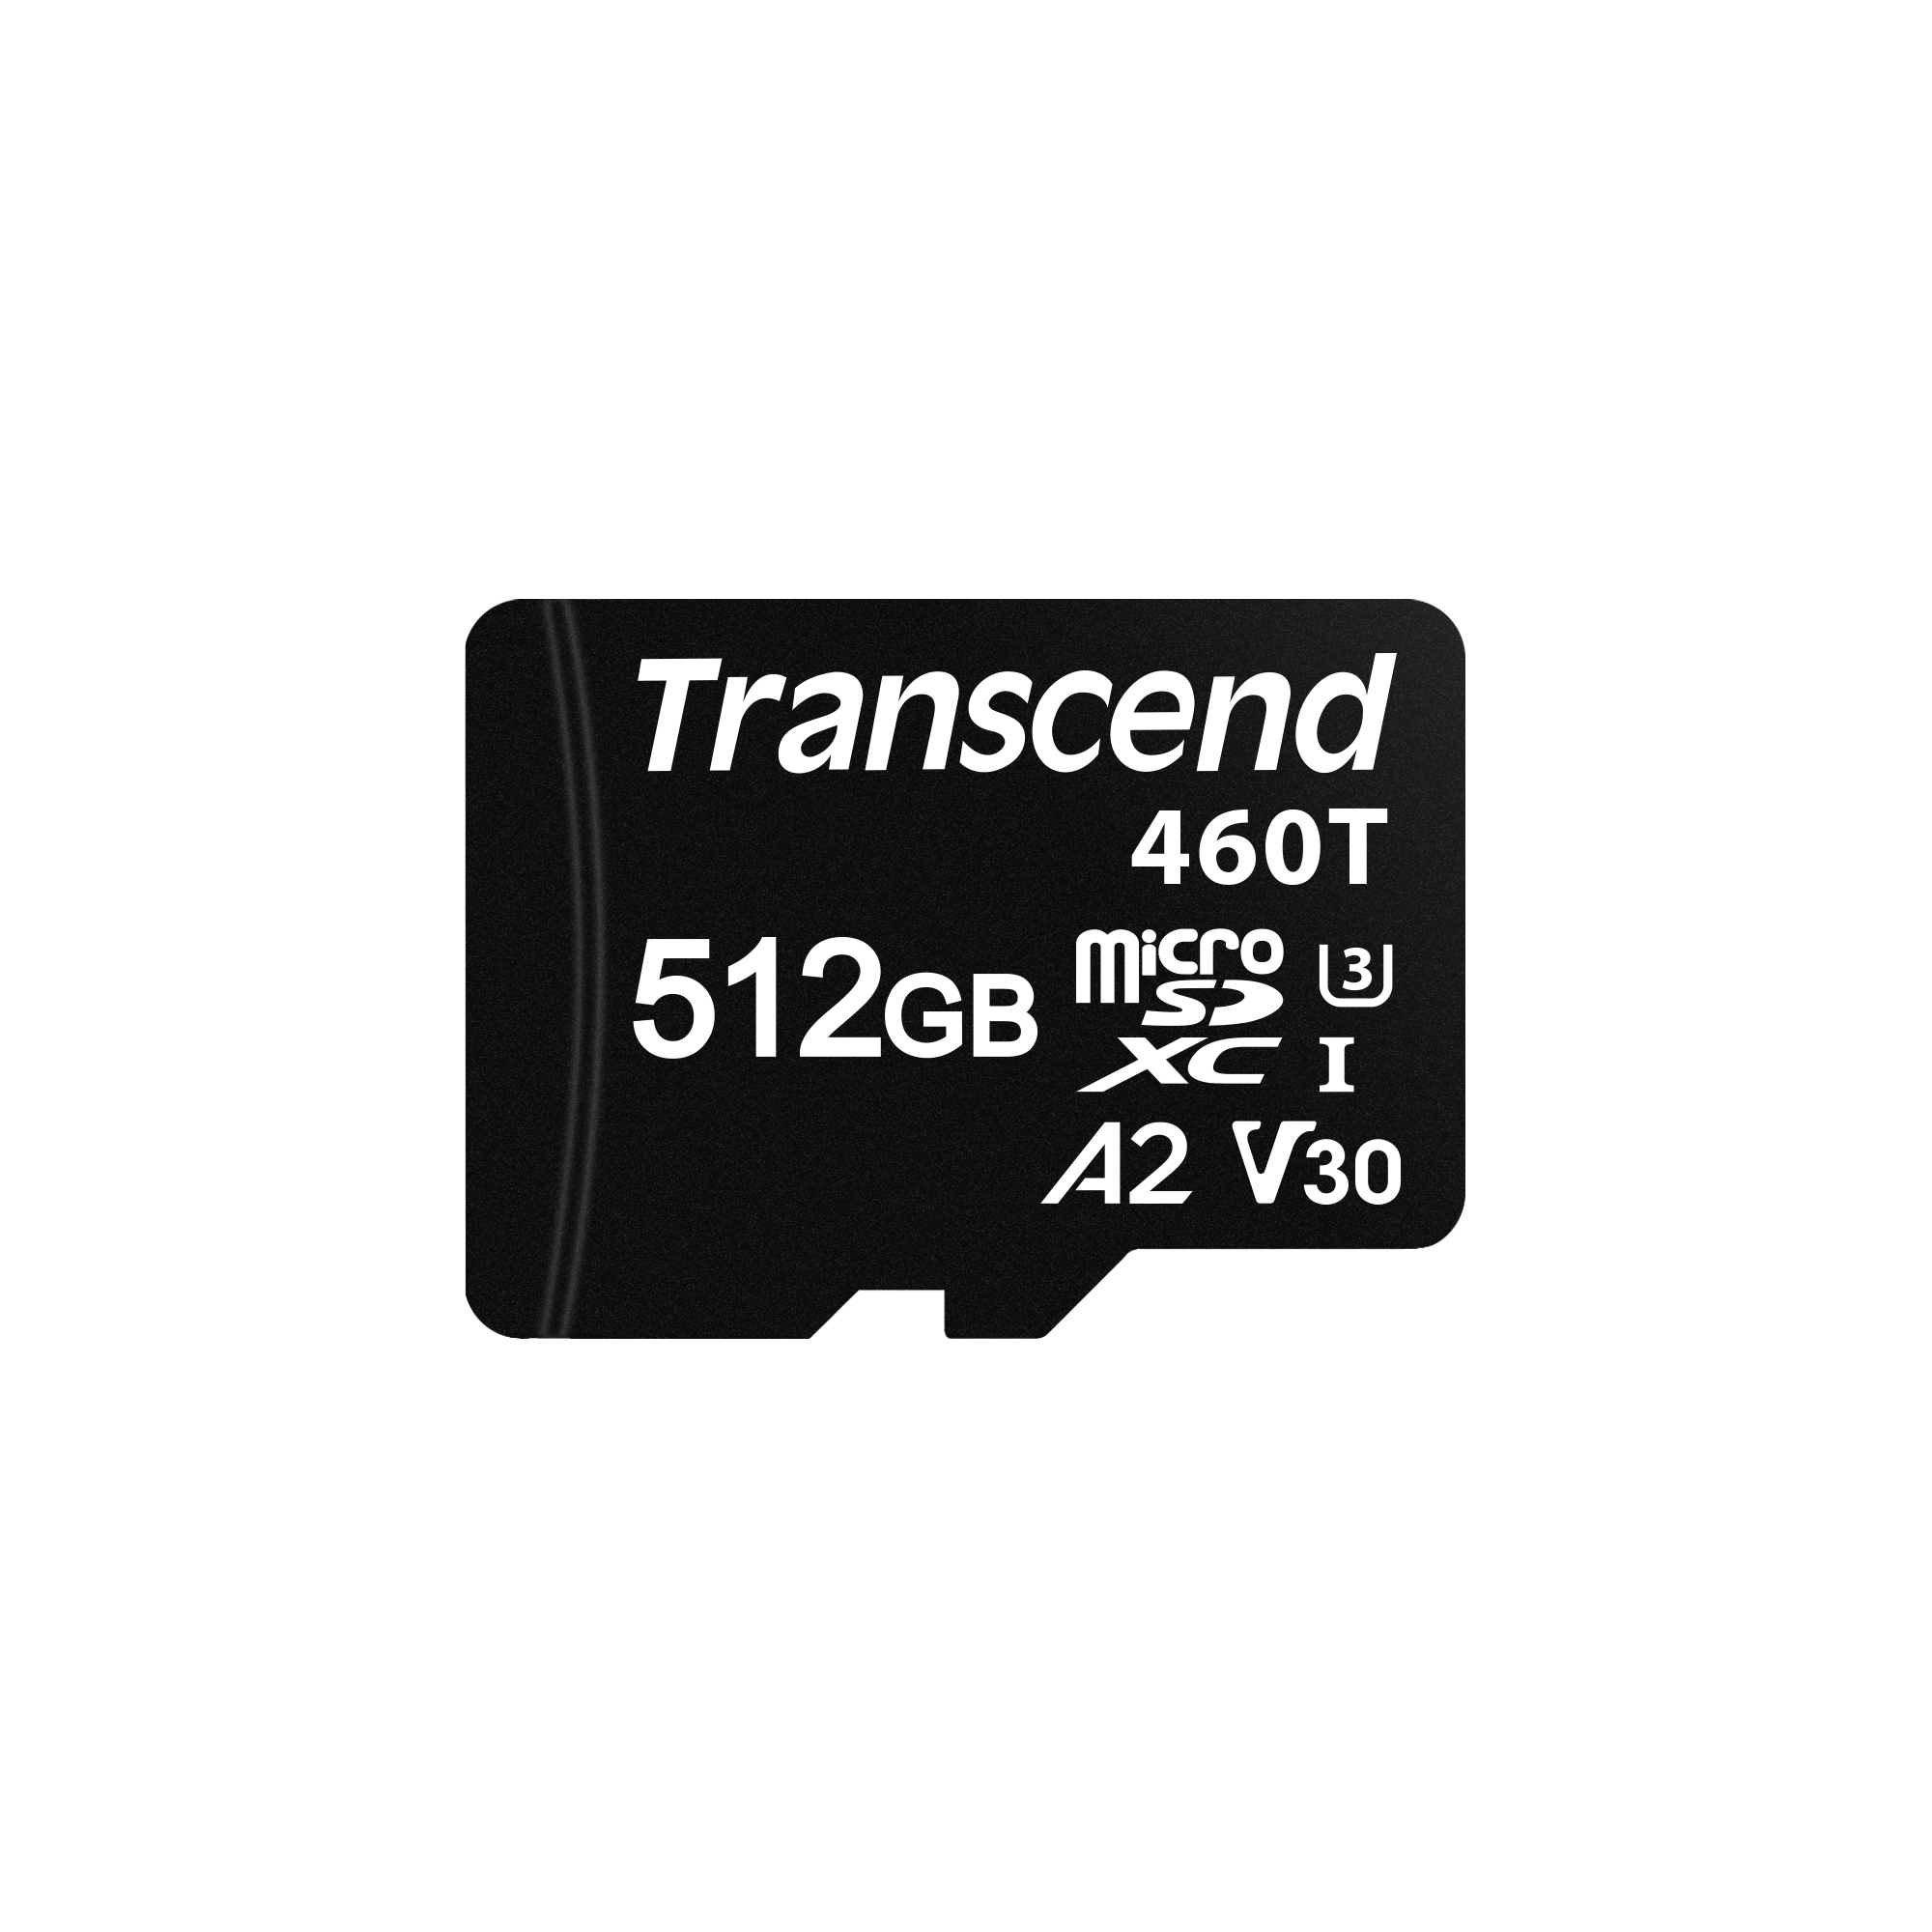 Transcend 512GB micro SD 460T embedded geheugenkaart